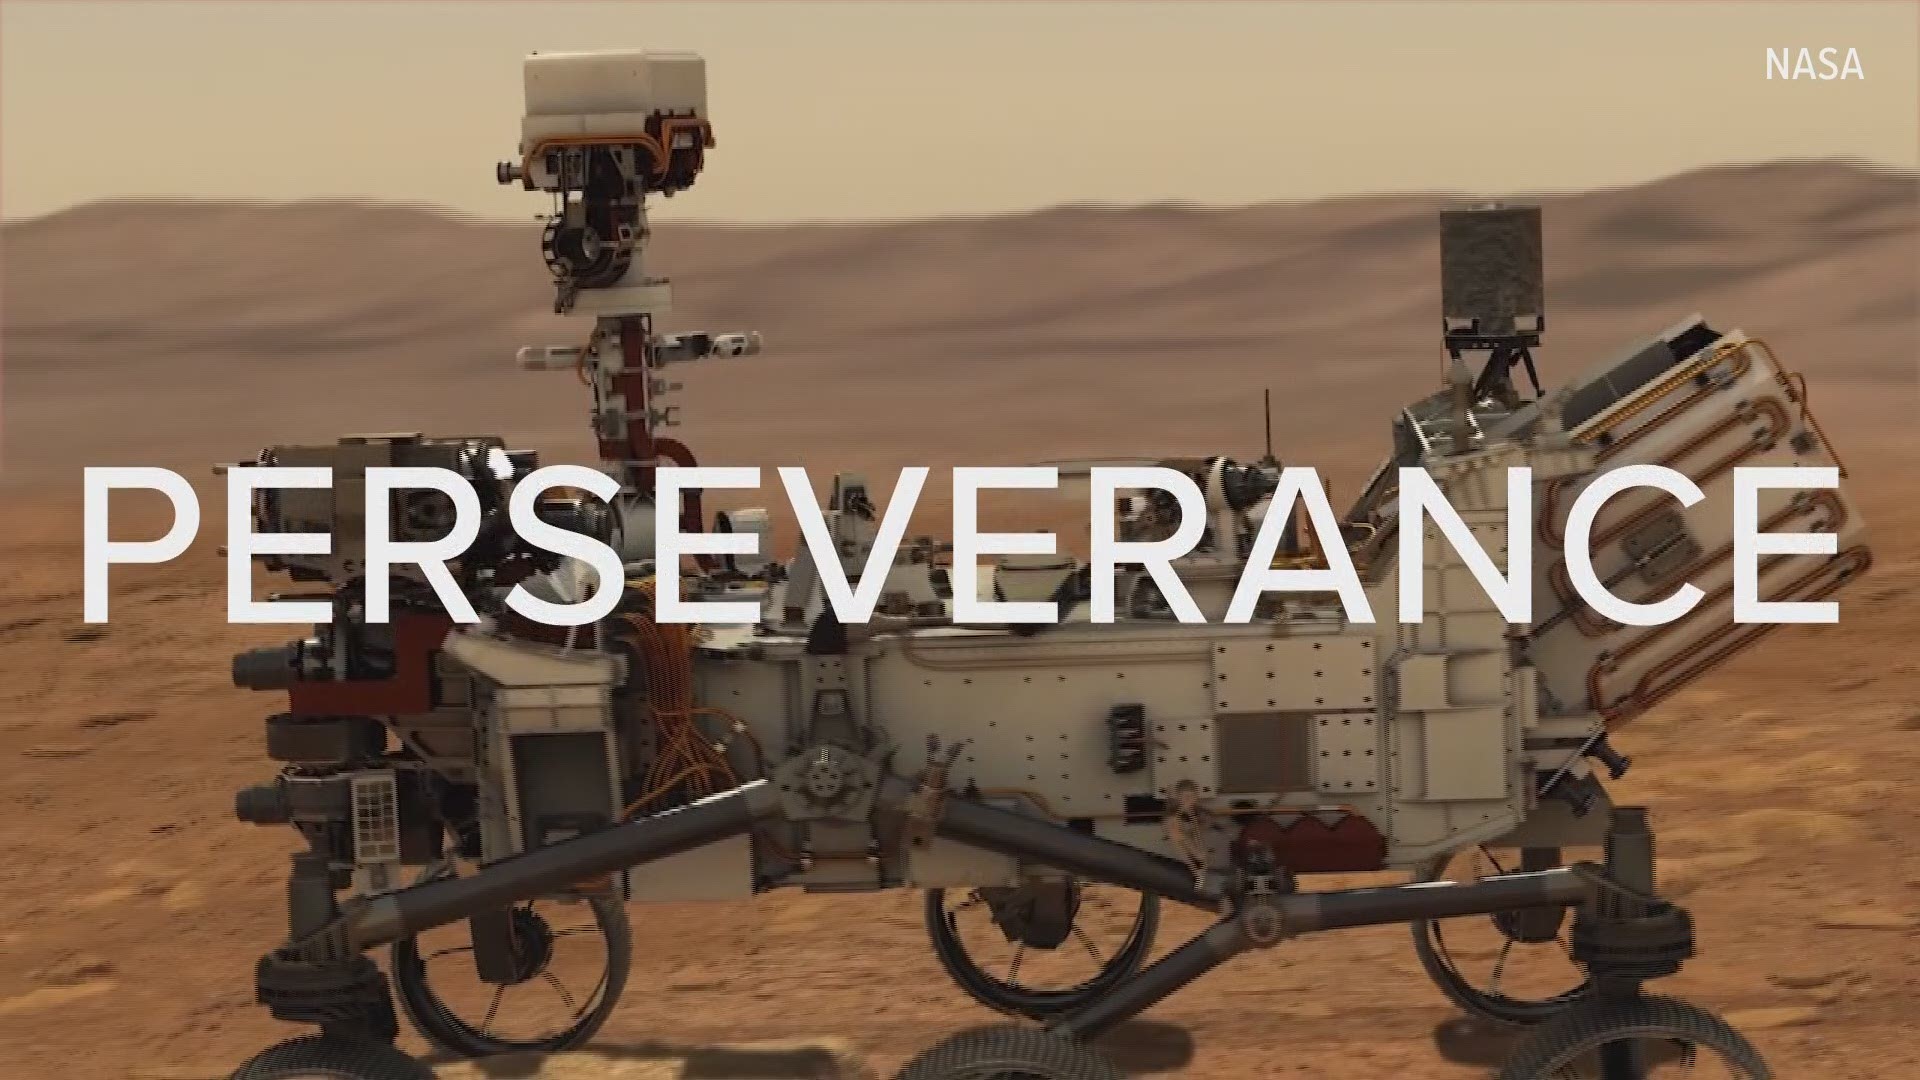 The Perseverance rover is the newest of 22 NASA missions to the red planet since the Mariner spacecraft in the 1960s.